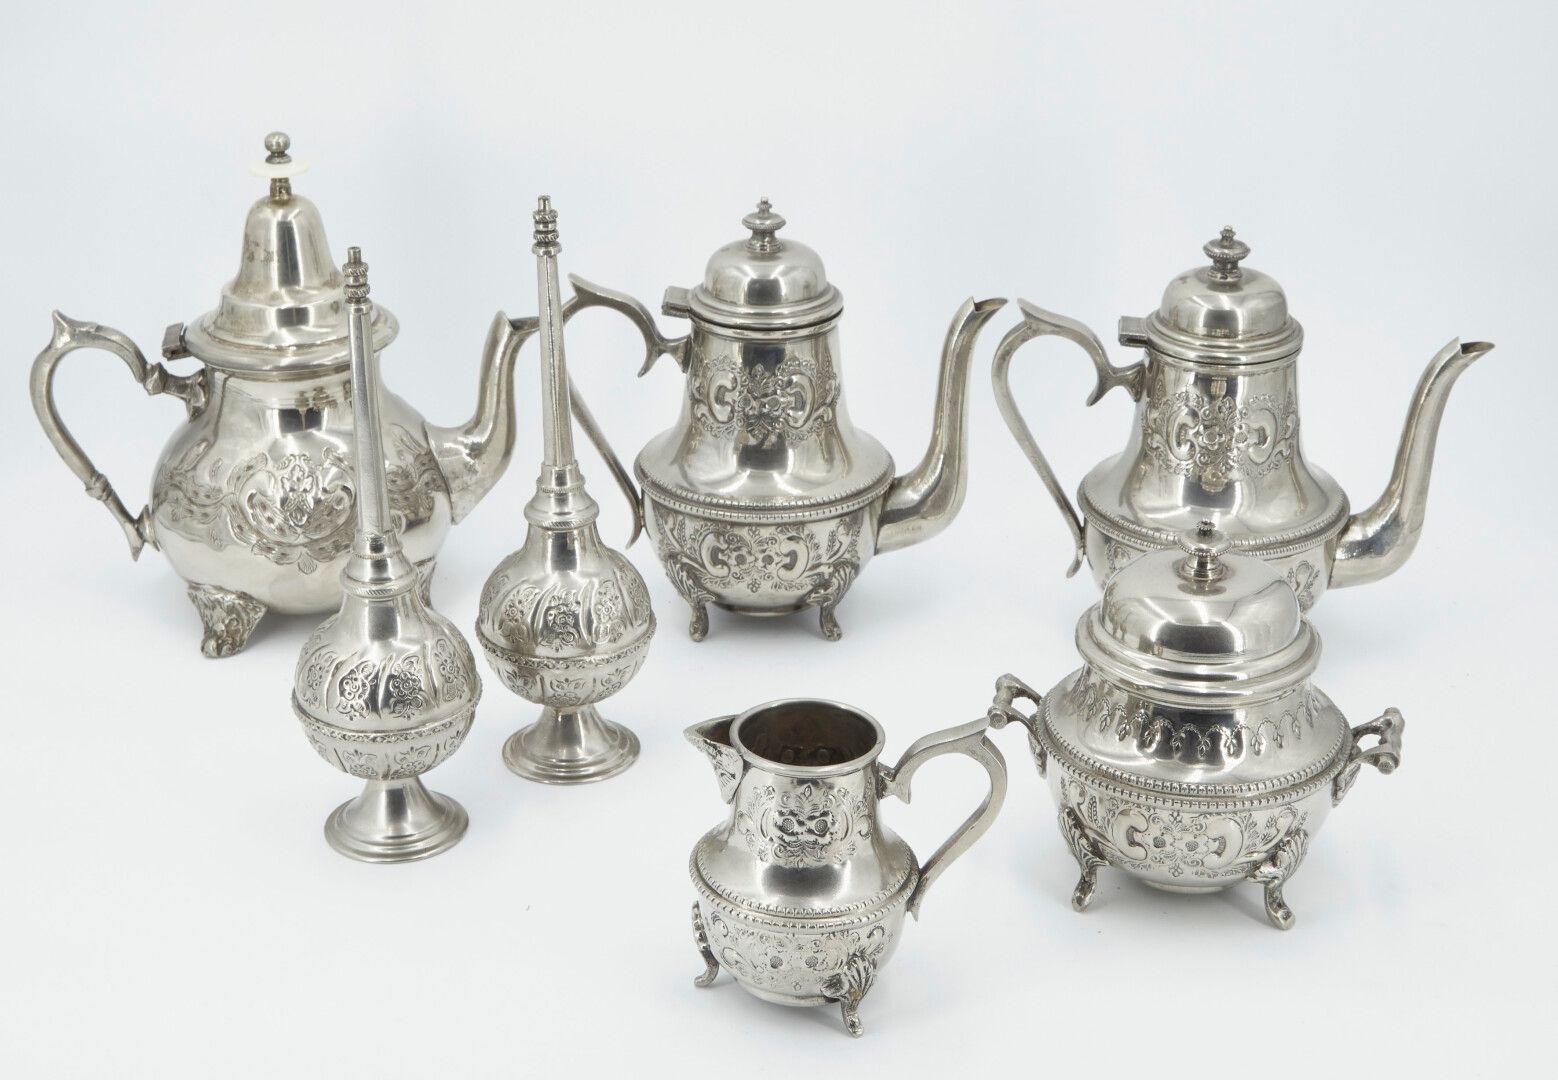 Null Chased and stamped metal tea set including:

- three teapots

- a milk jug
&hellip;